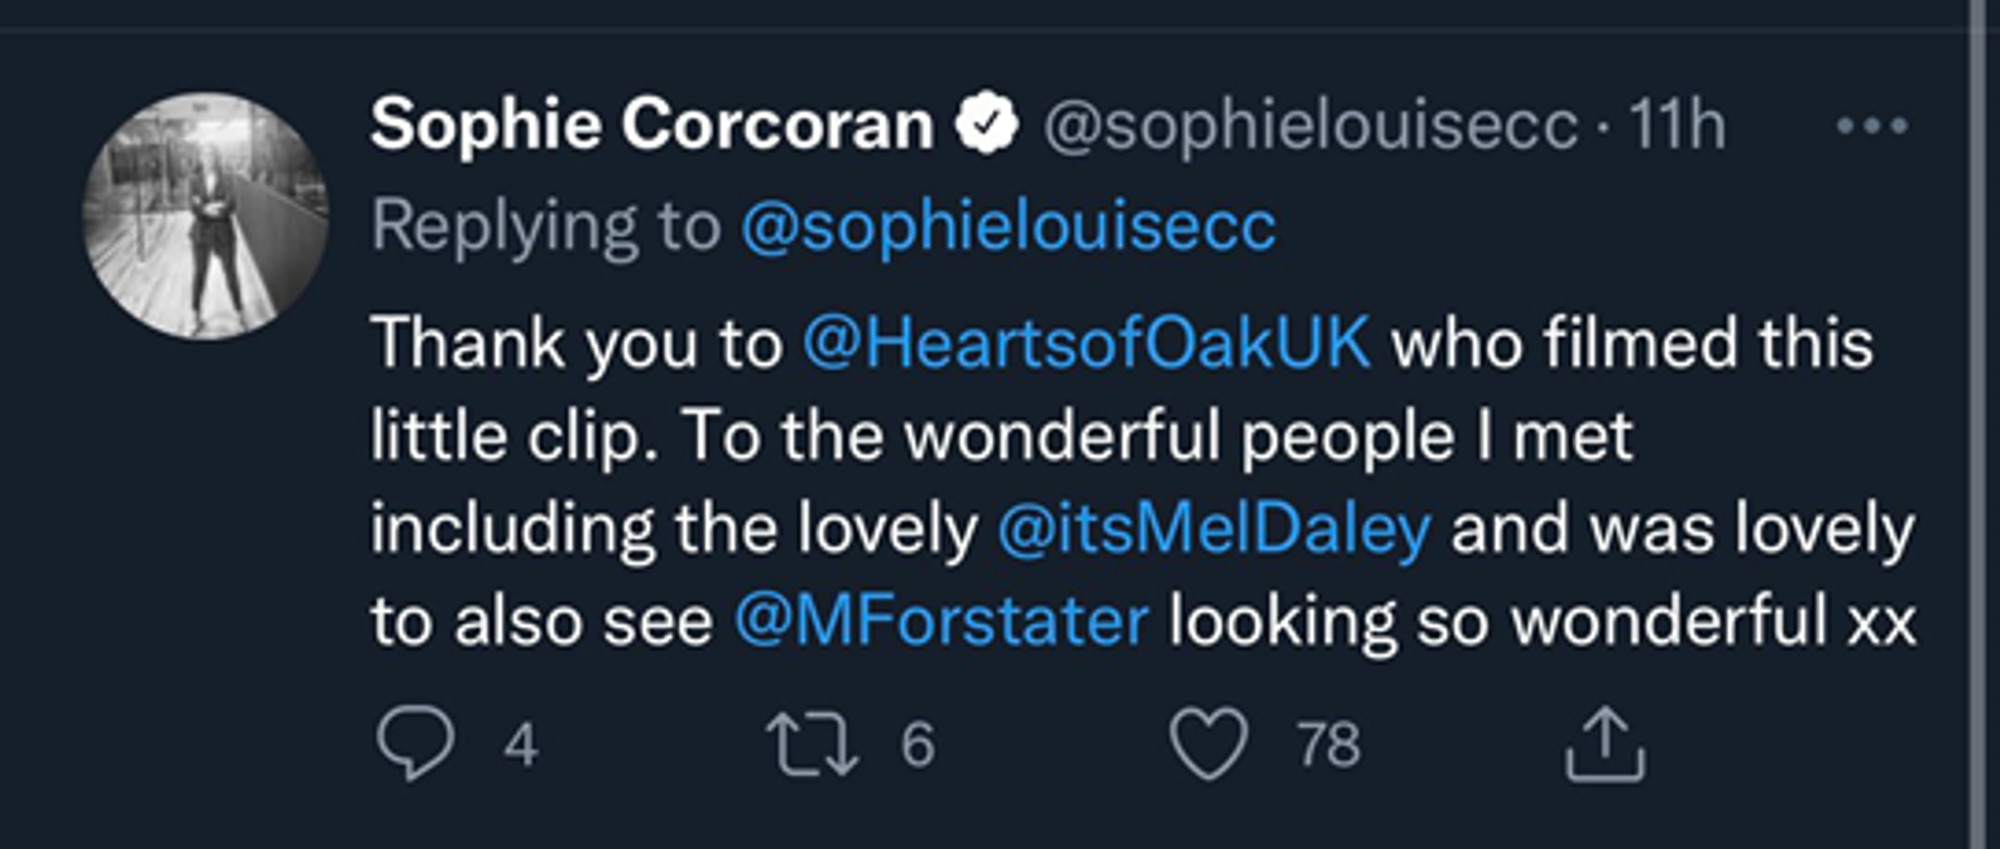 Sophie Corcoran tweets: Thank you to @HeartsOfOakUK who filmed this little clip. To the wonderful people I met including the lovely @itsMelDaley and was lovely to also see @MForstater looking so wonderful